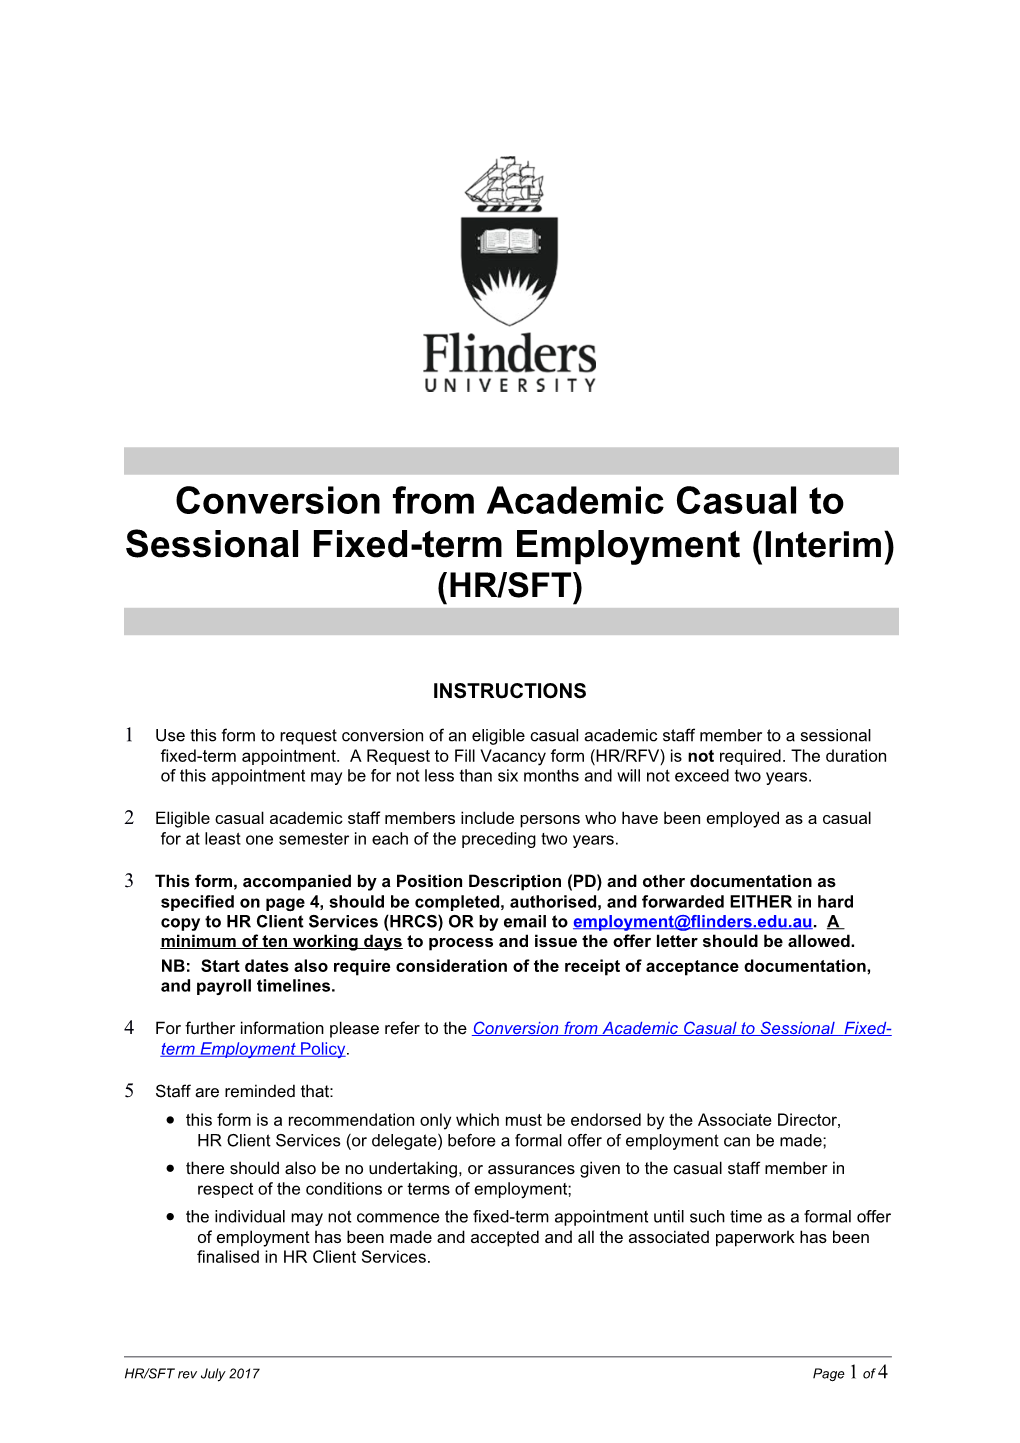 Conversion from Academic Casual to Sessional Fixed-Term Employment(Interim)(HR/SFT)